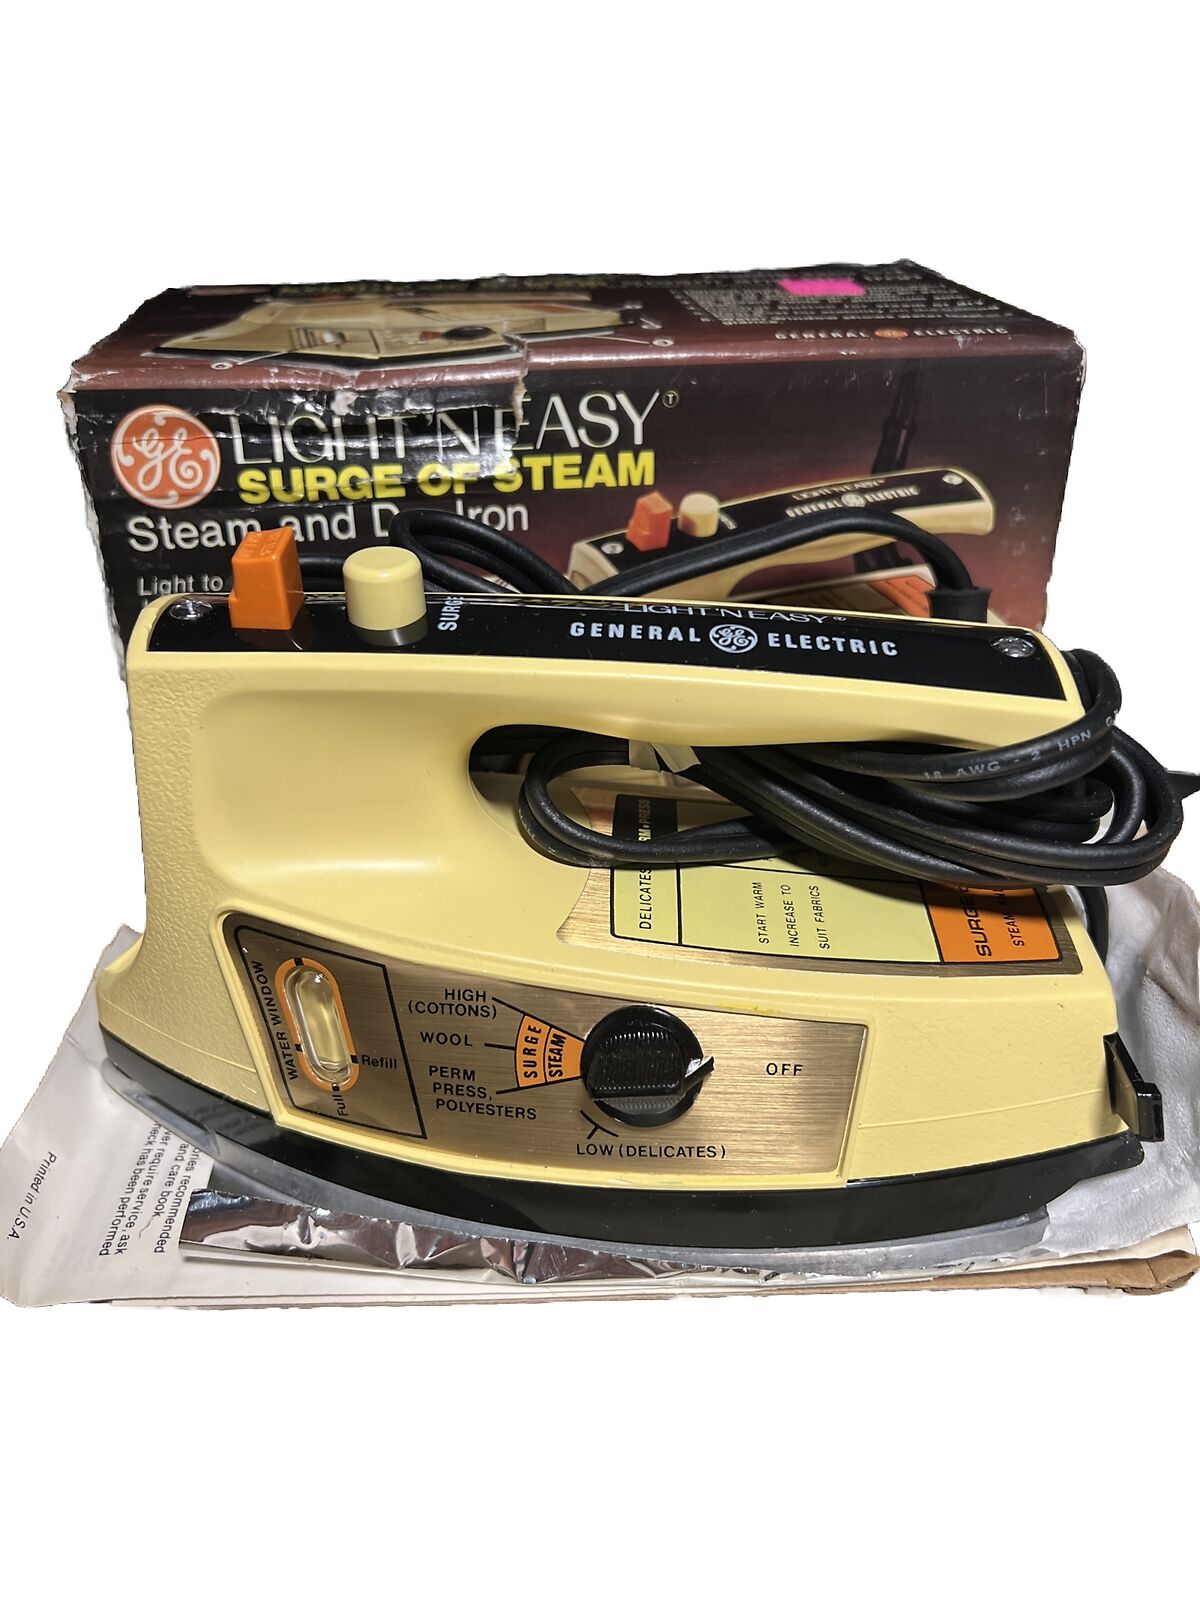 Vintage NOS GE Light’n Easy Steam & dry Iron F200HR 9500-311 Sewing USA 1970’s